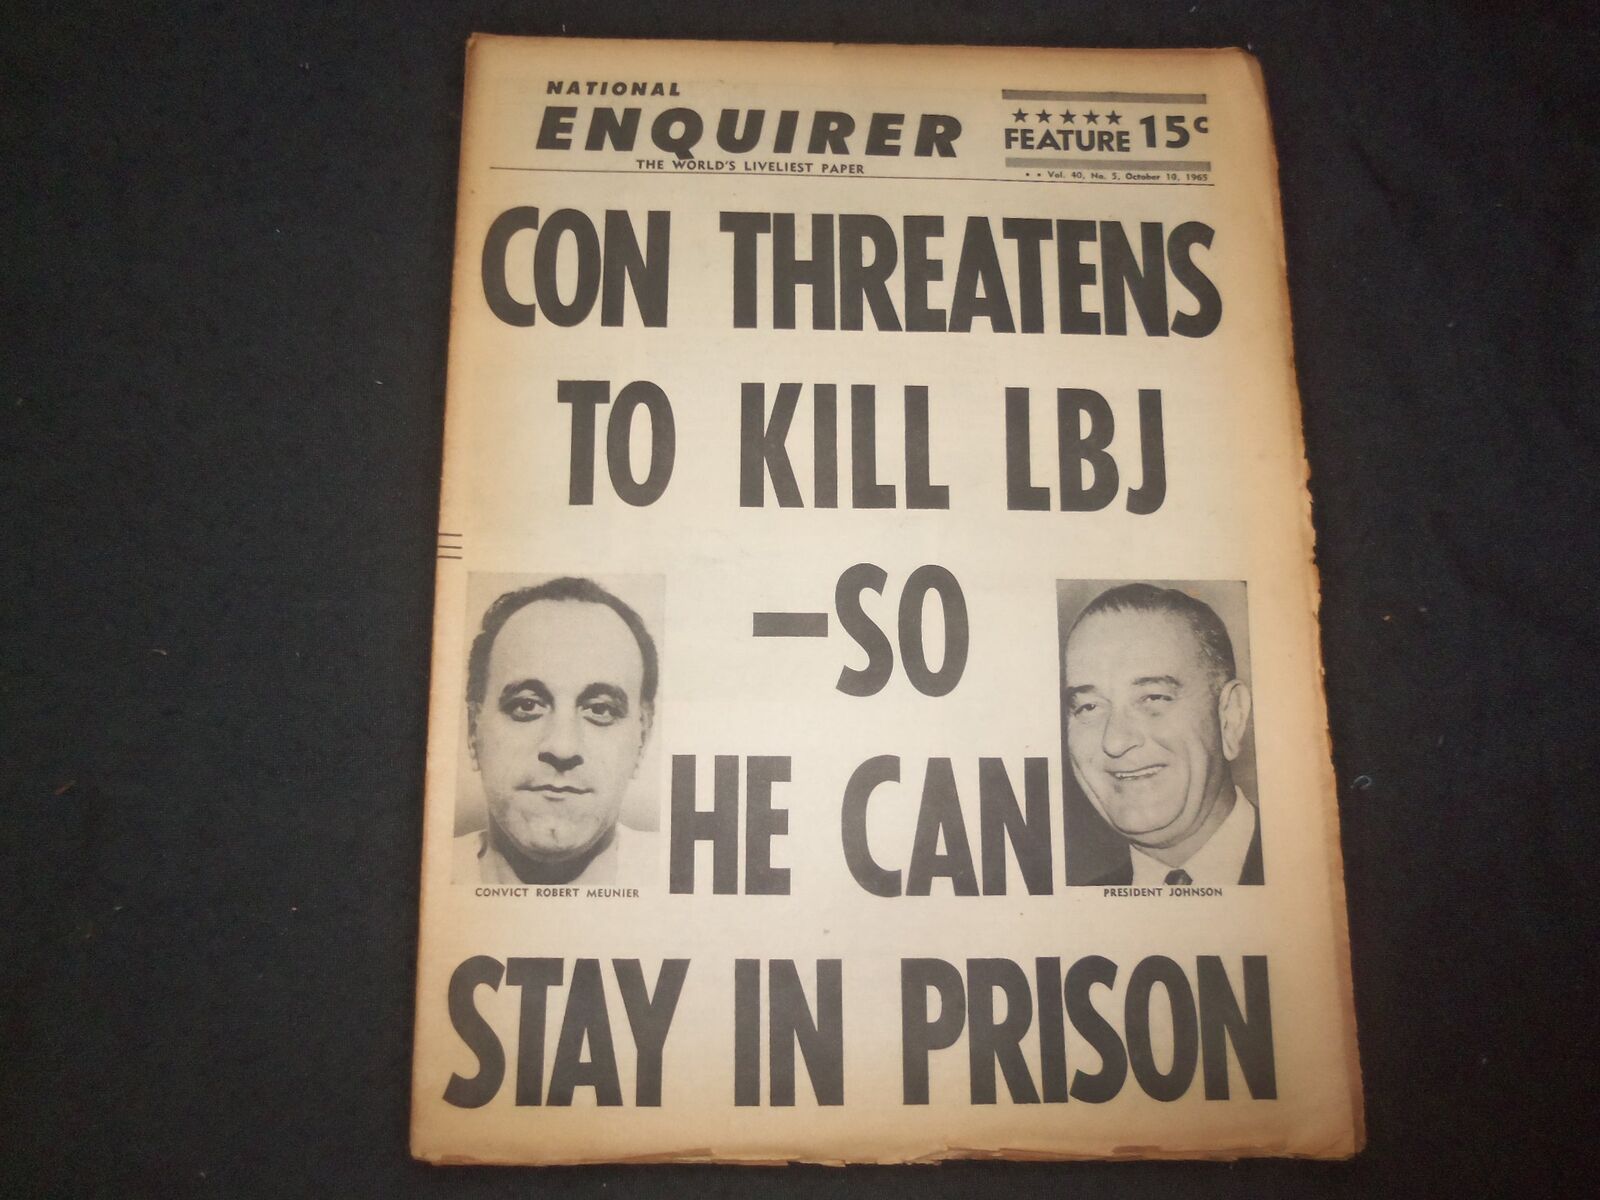 1965 OCTOBER 10 NATIONAL ENQUIRER NEWSPAPER- CON THREATENS TO KILL LBJ - NP 7395